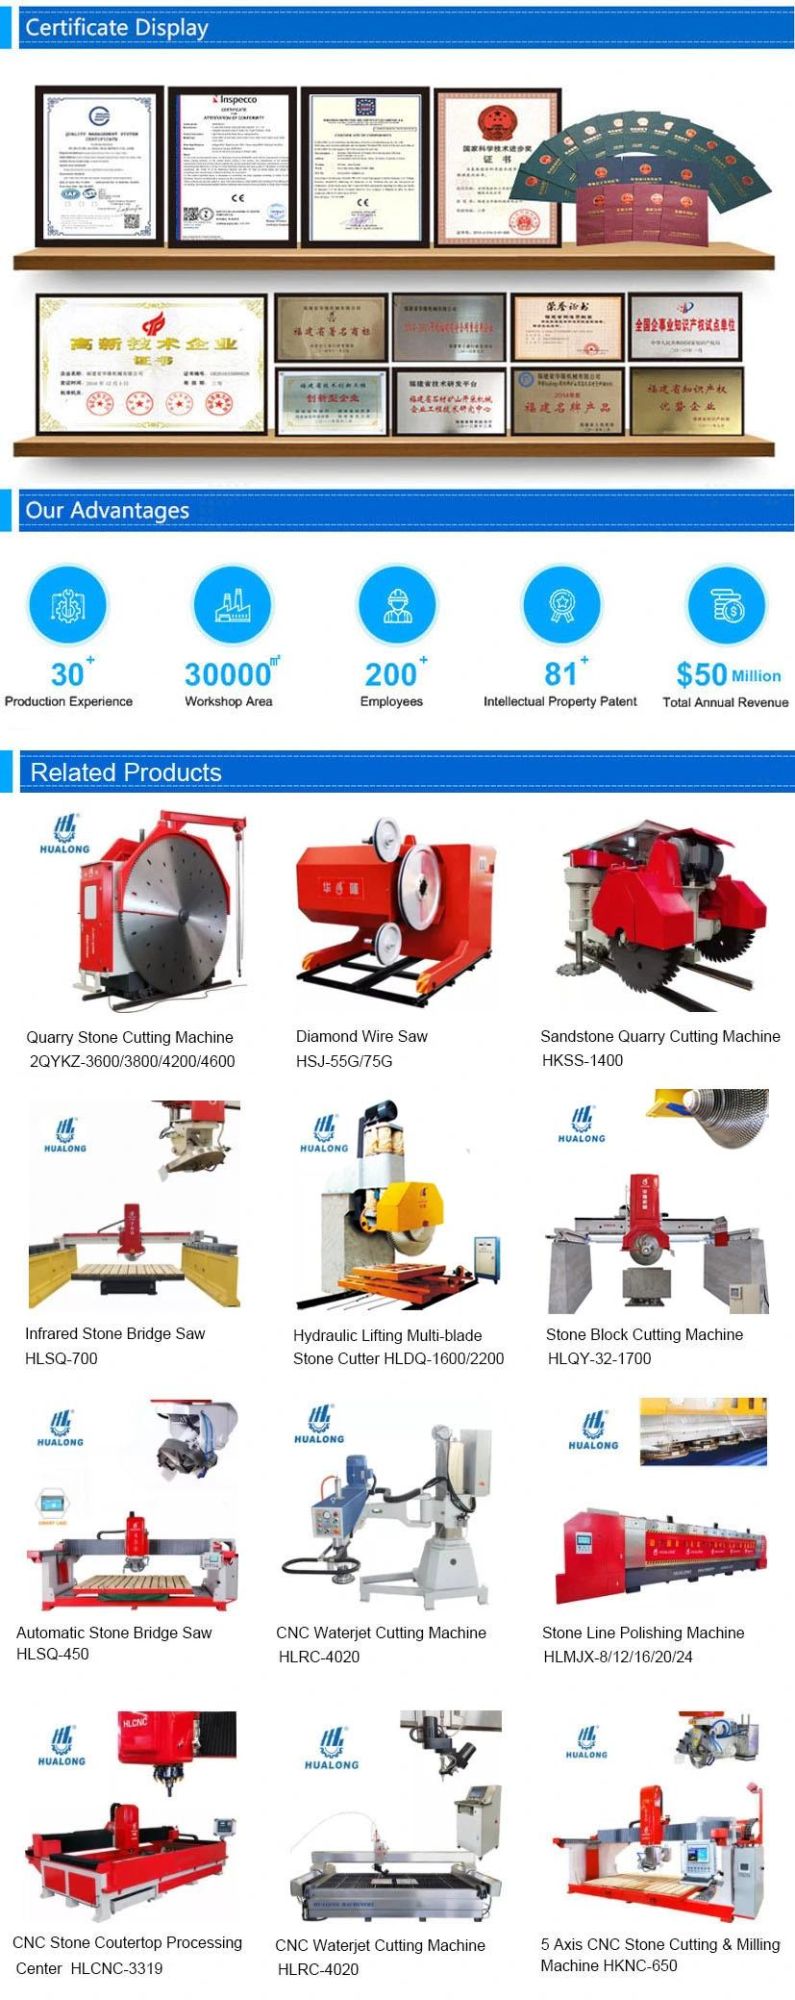 Hualong Stone Machinery Double Diamond Tool Saw Blade Stone Cutting Machine for Granite Block Quarry Mining Marble Cutter Natural Stone Saw